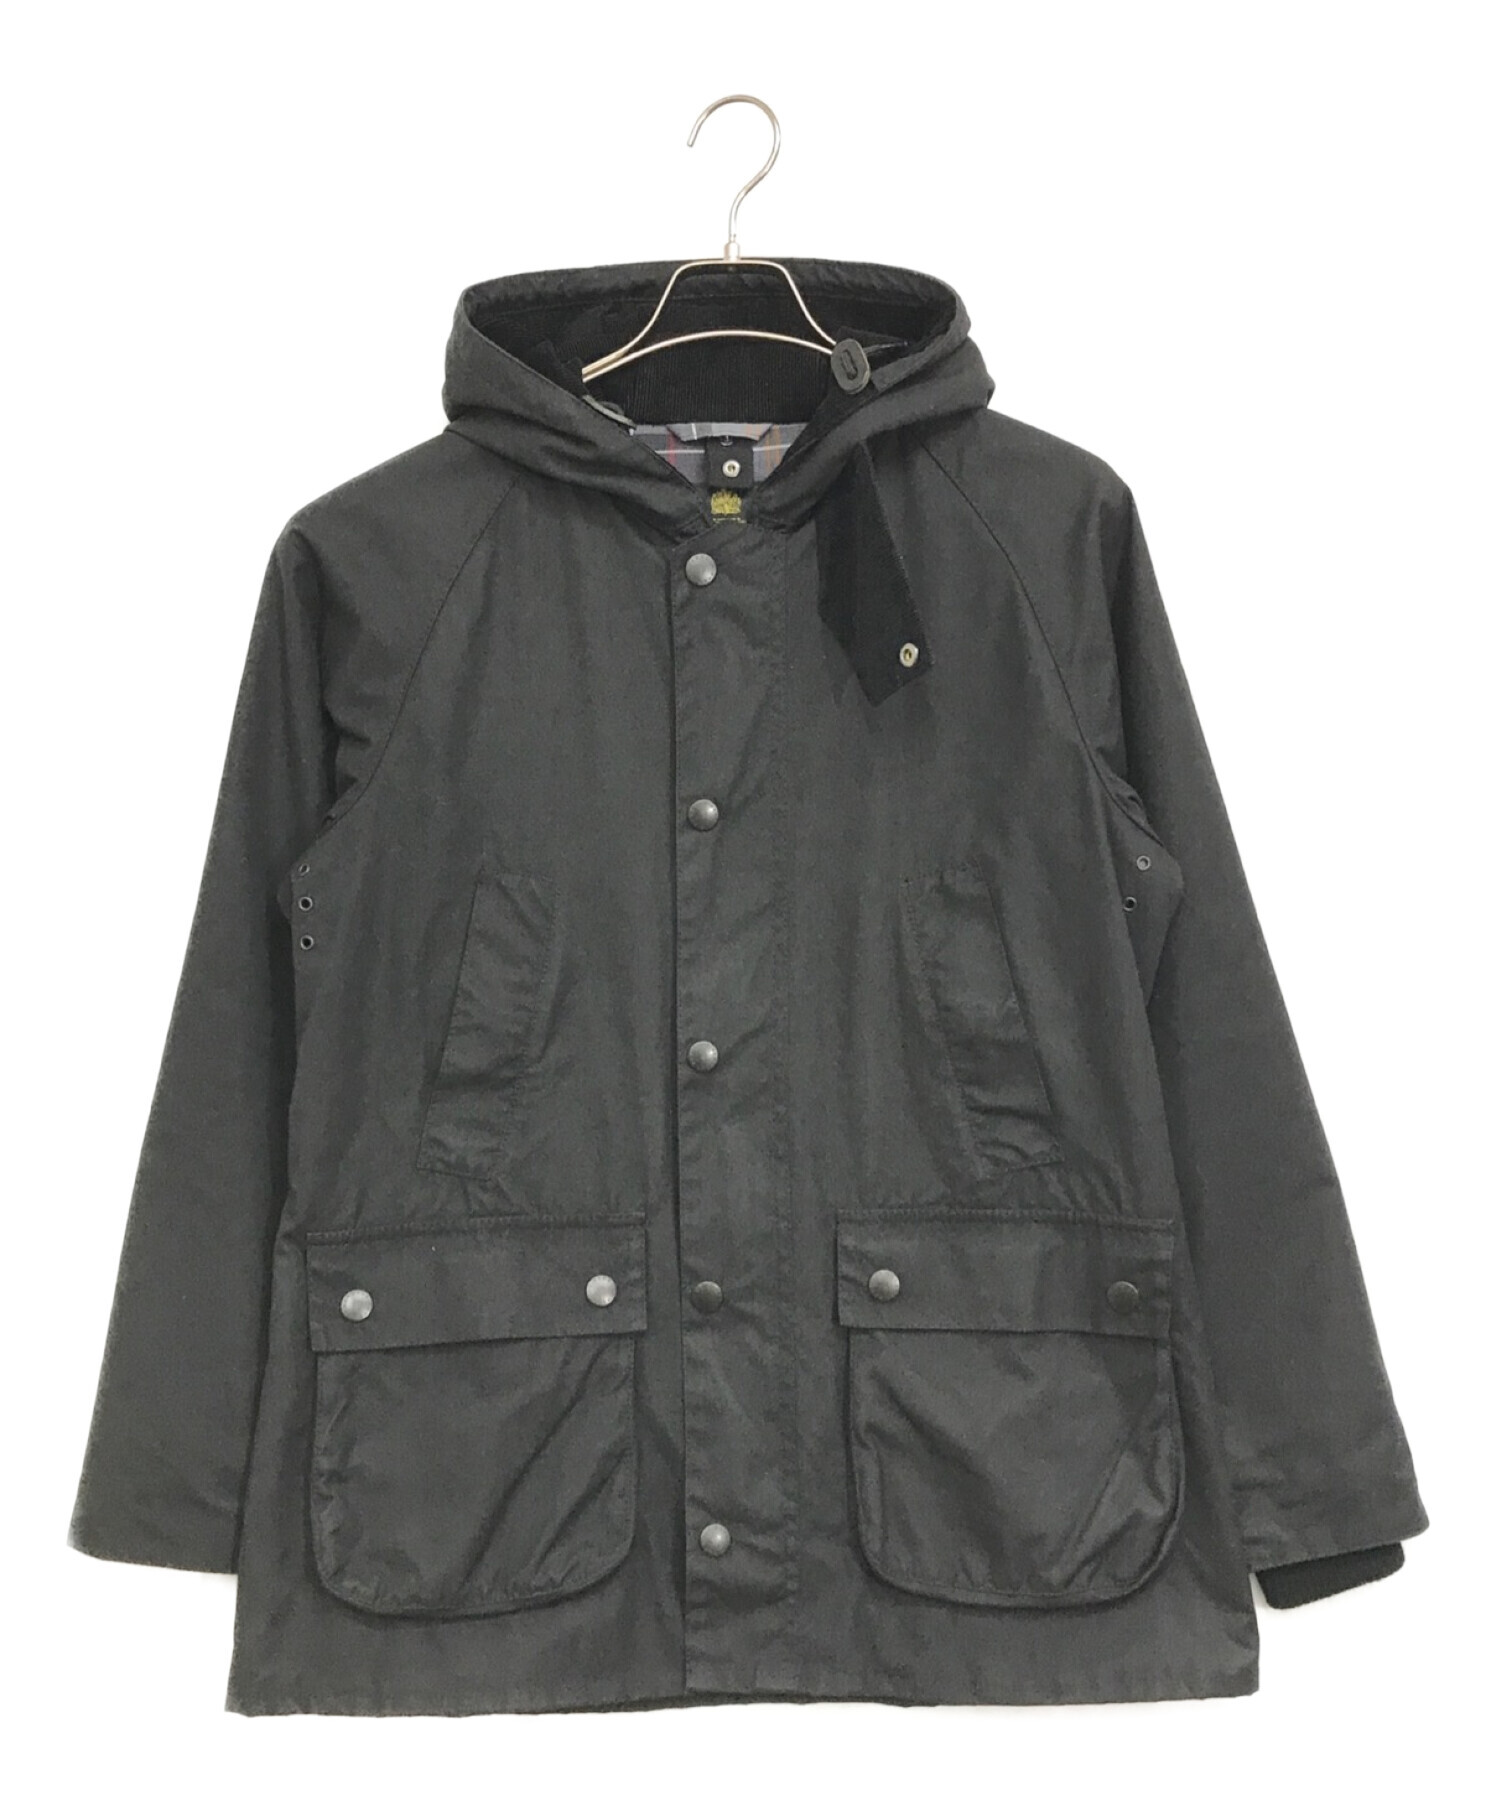 Barbour バブアー HOODED BEDALE SL ブラック 38 | tradexautomotive.com